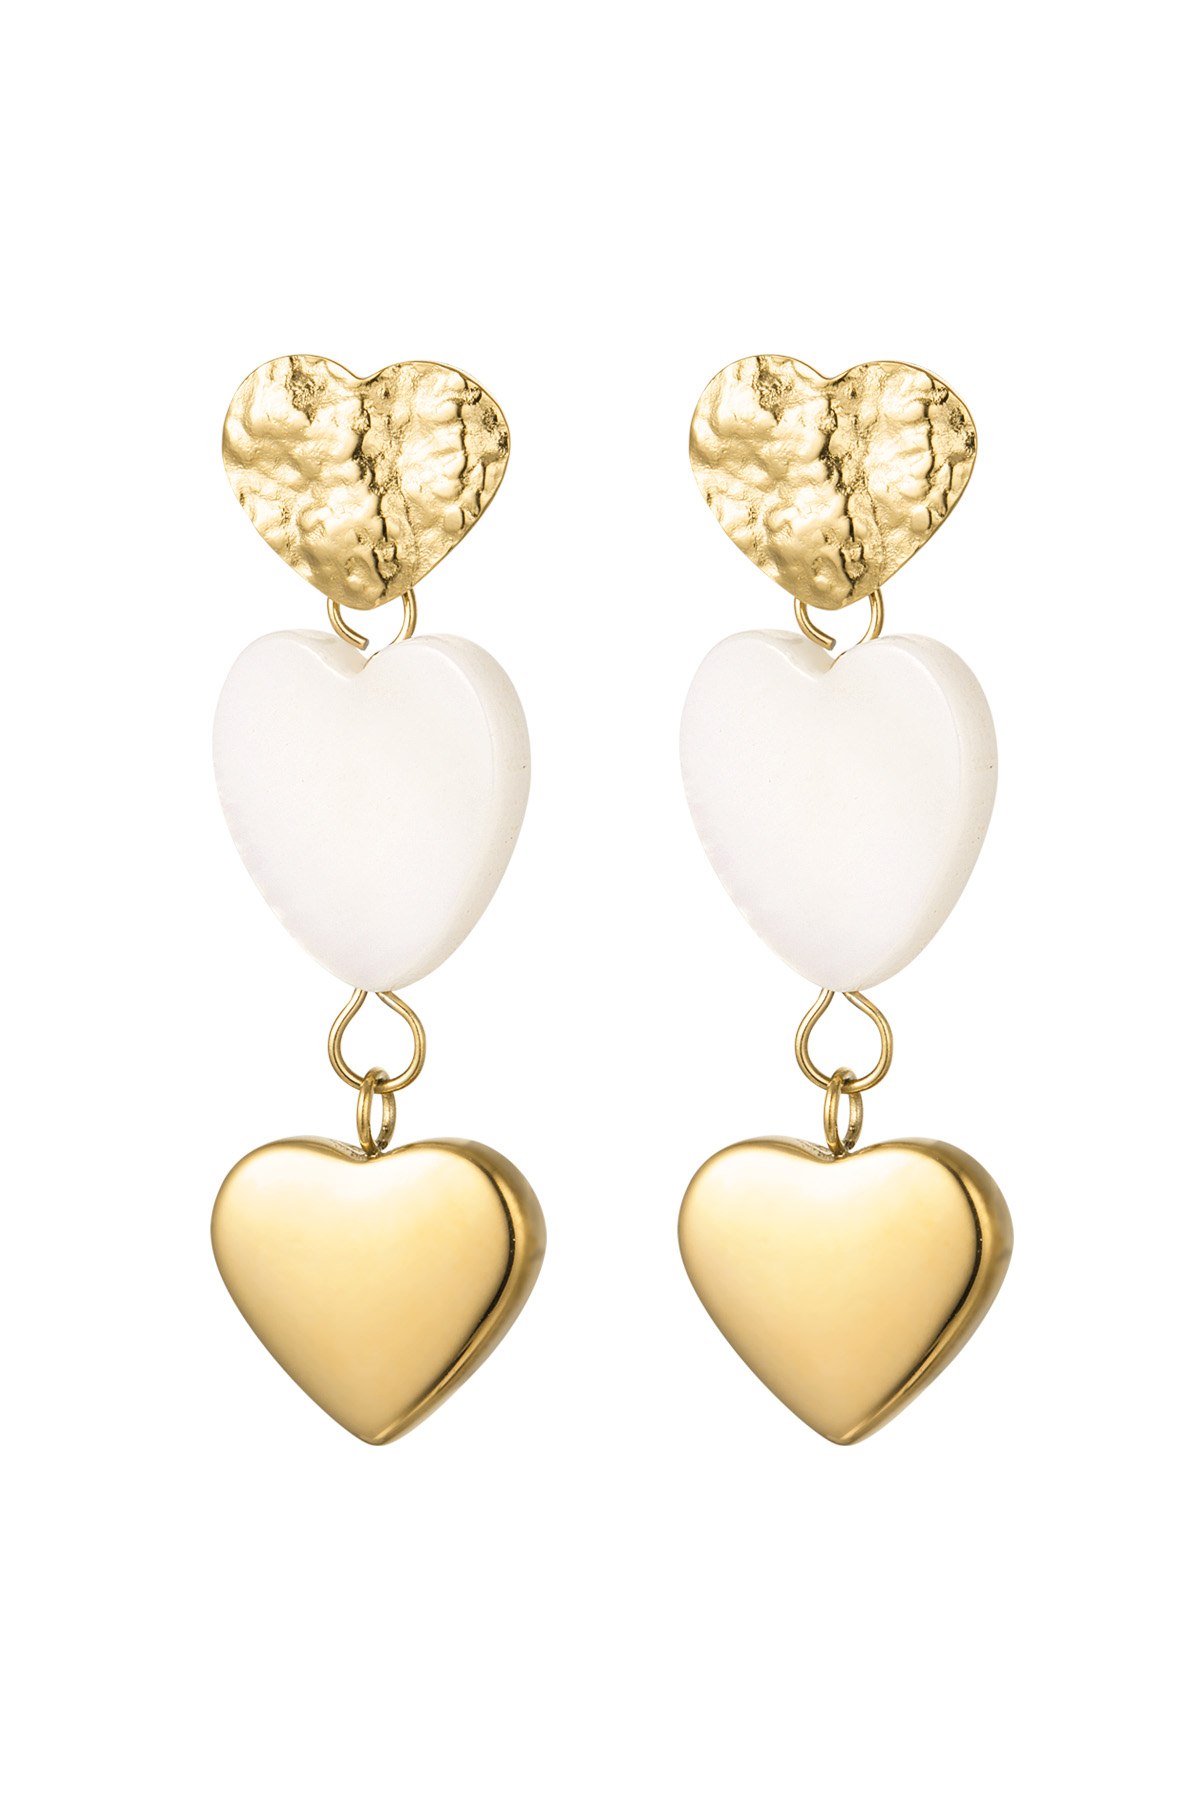 Earrings 3 x heart in a row - gold Stainless Steel h5 